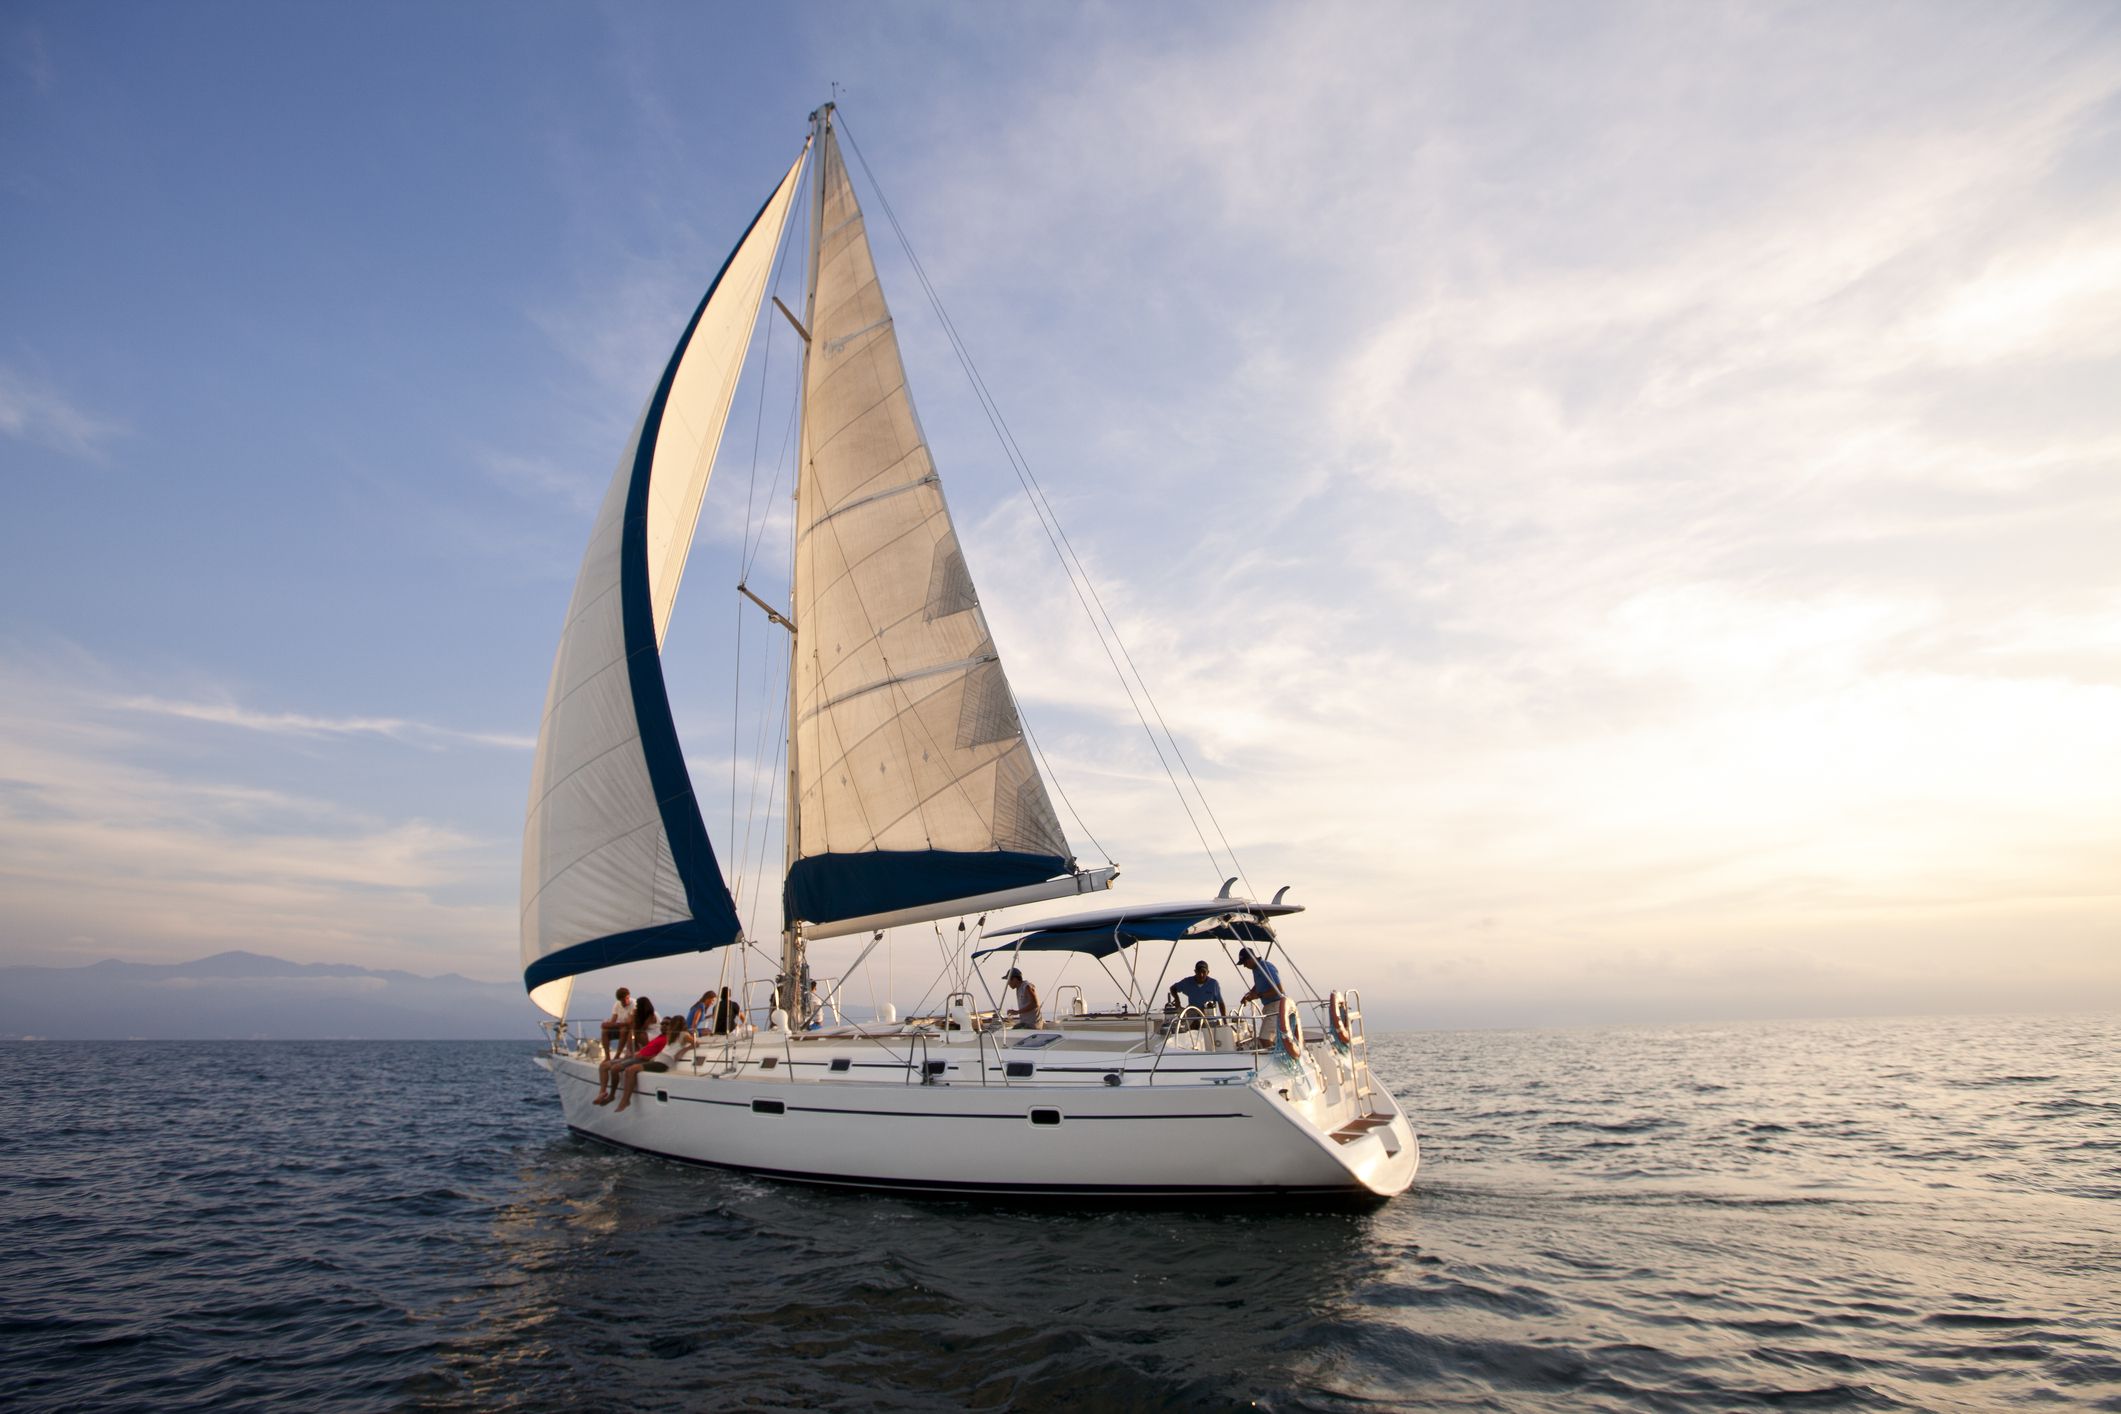 Tips for Docking a Sailboat